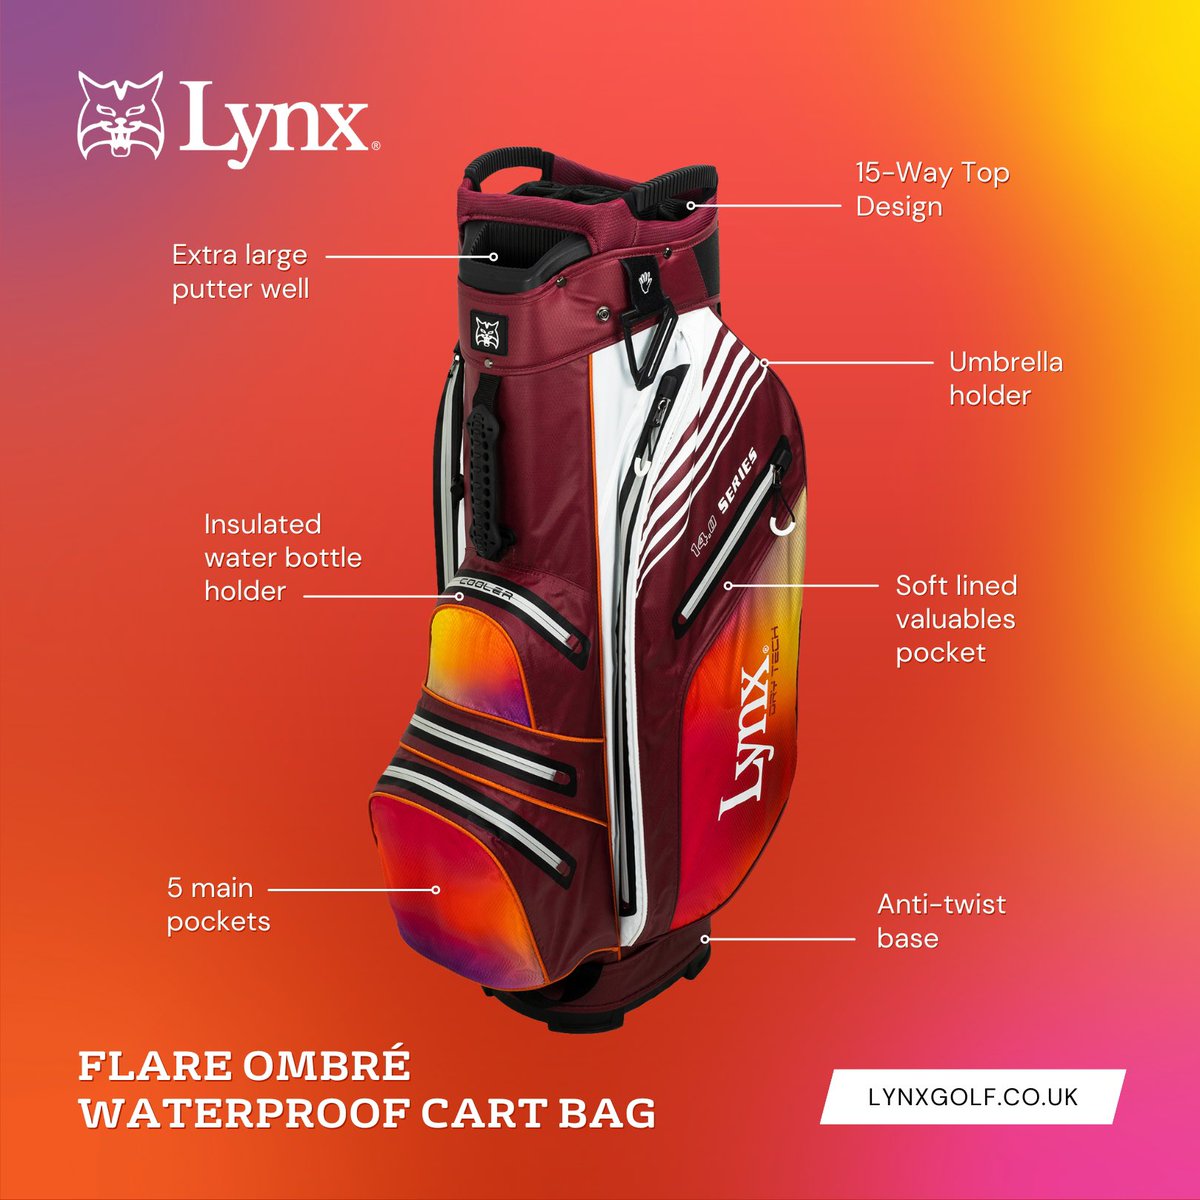 Make a statement on the course with our Flare Ombré Waterproof Cart Bags!🔥⛳ Designed for standout golfers, these bags feature a 15-way top design, integrated handle system, and an array of pockets for all your essentials👏🏼 🇬🇧 lynxgolf.co.uk 🇺🇸 lynxgolfusa.com